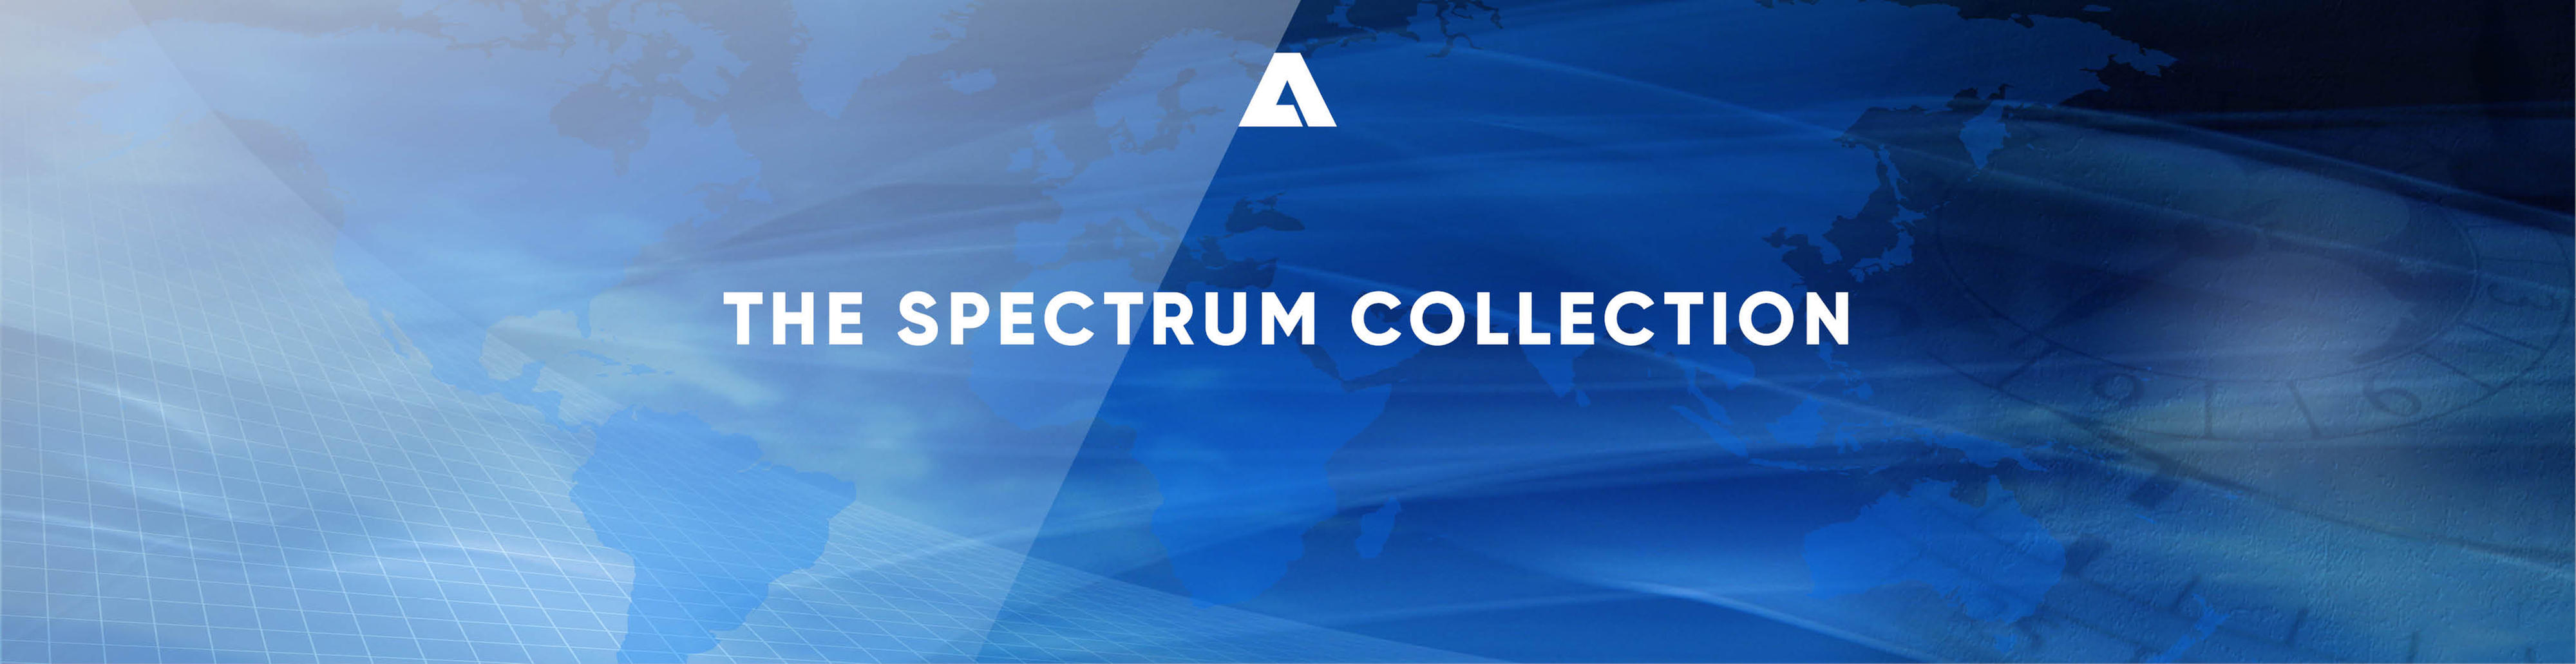 The spectrum collection